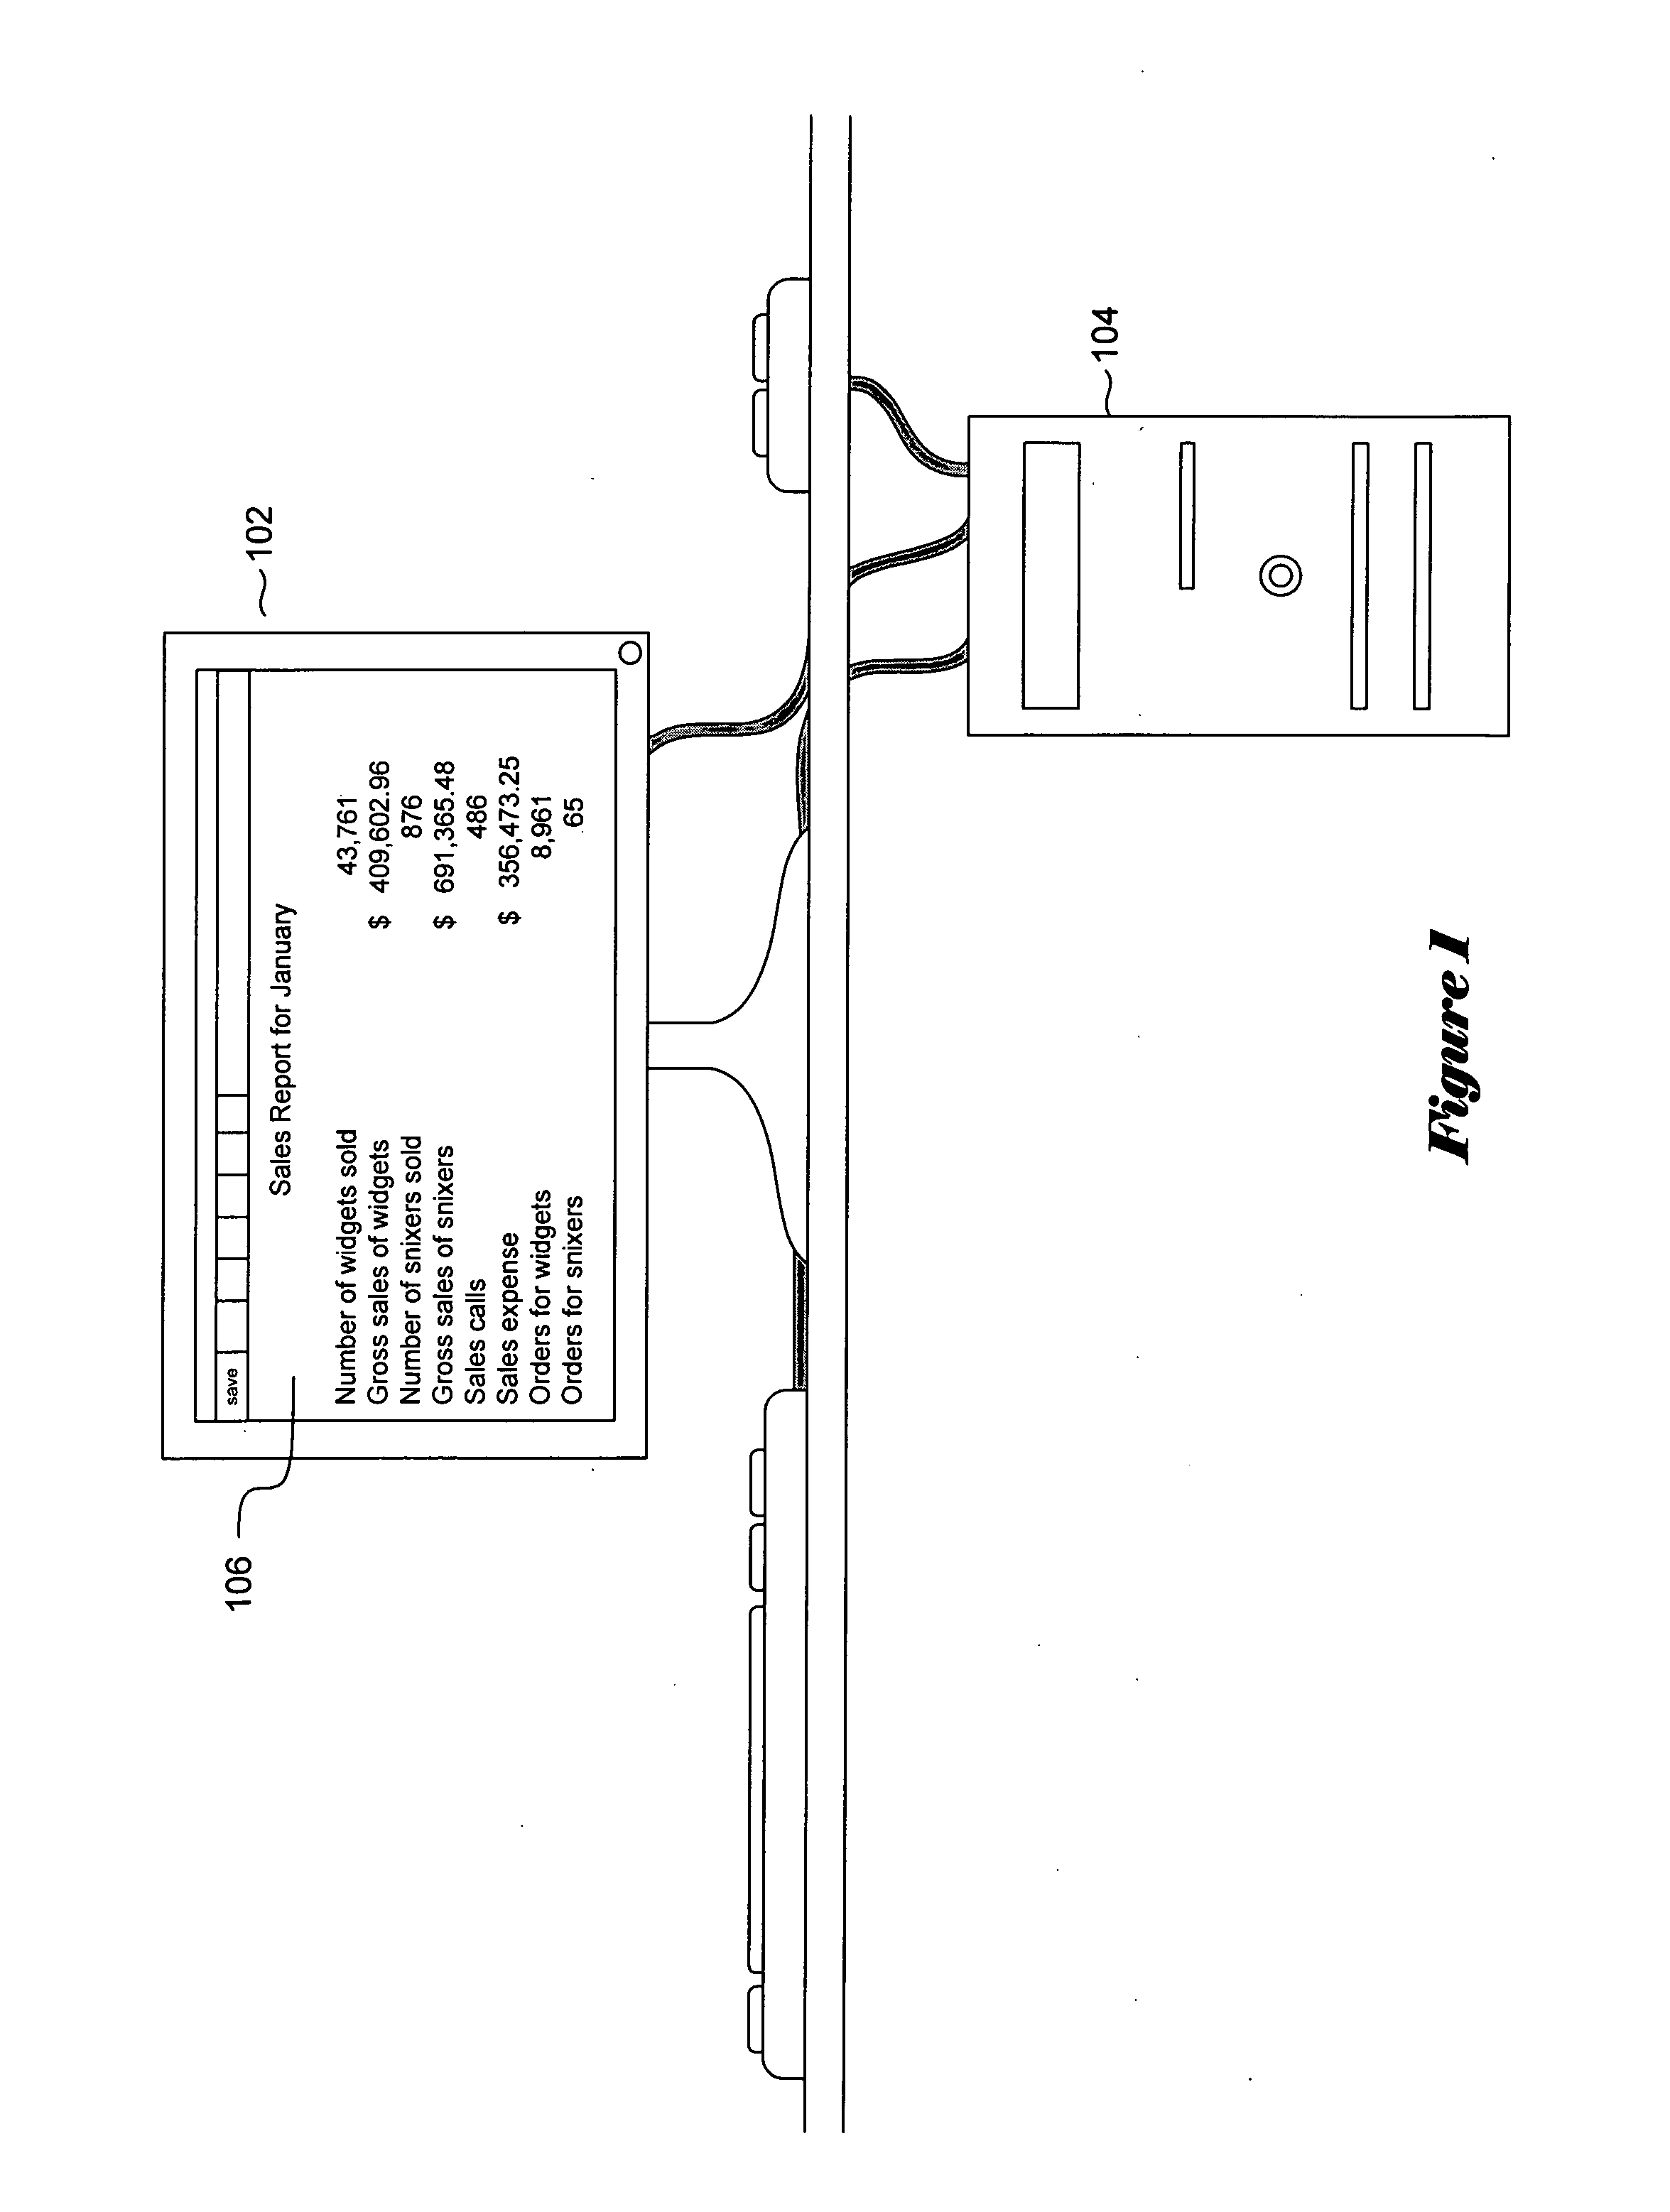 Method and system for scaleable, distributed, differential electronic-data backup and archiving